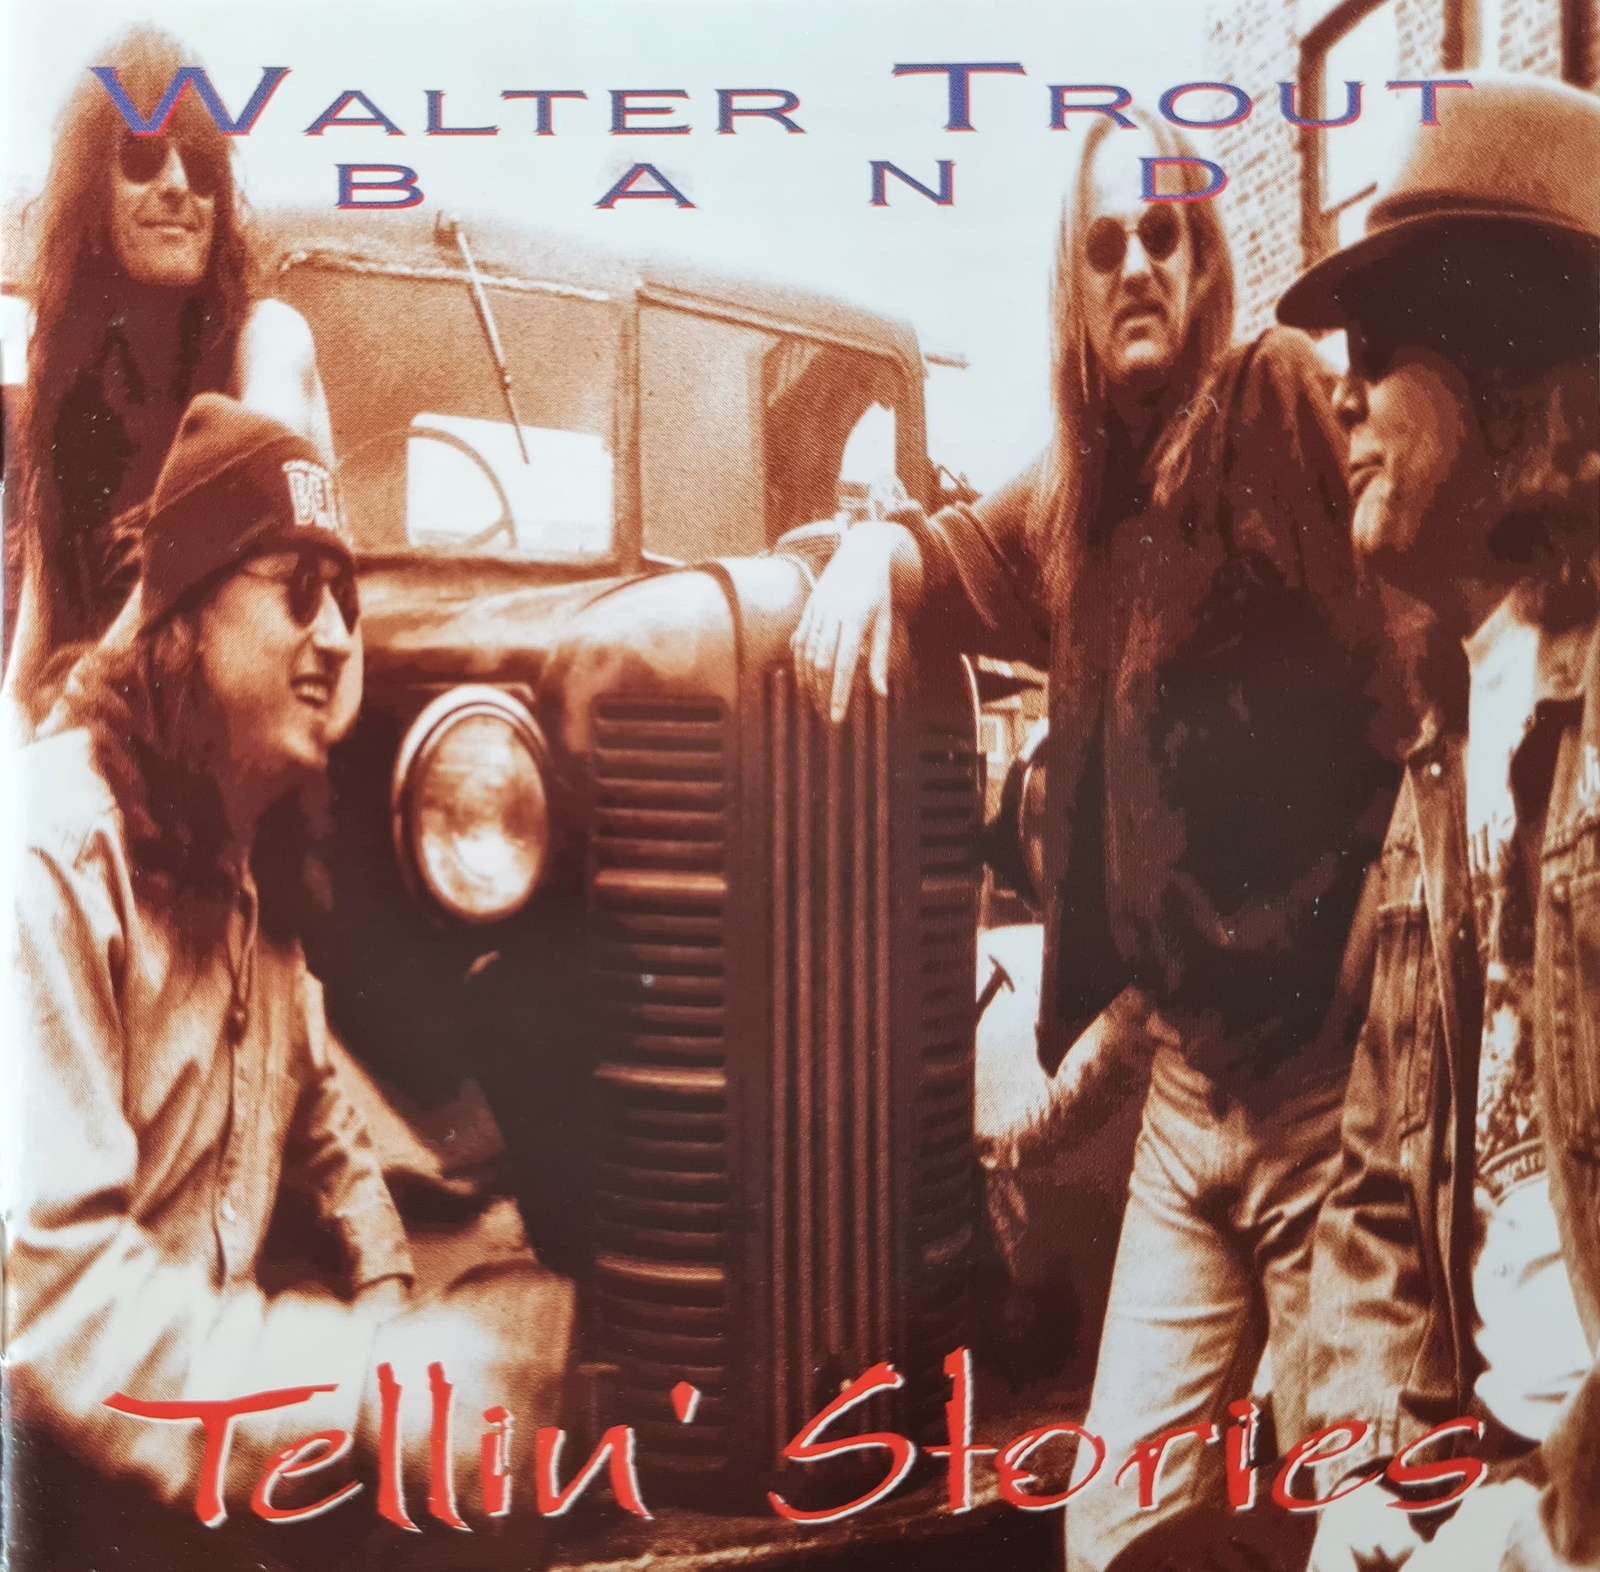 Walter Trout Band - Tellin' Stories (CD)